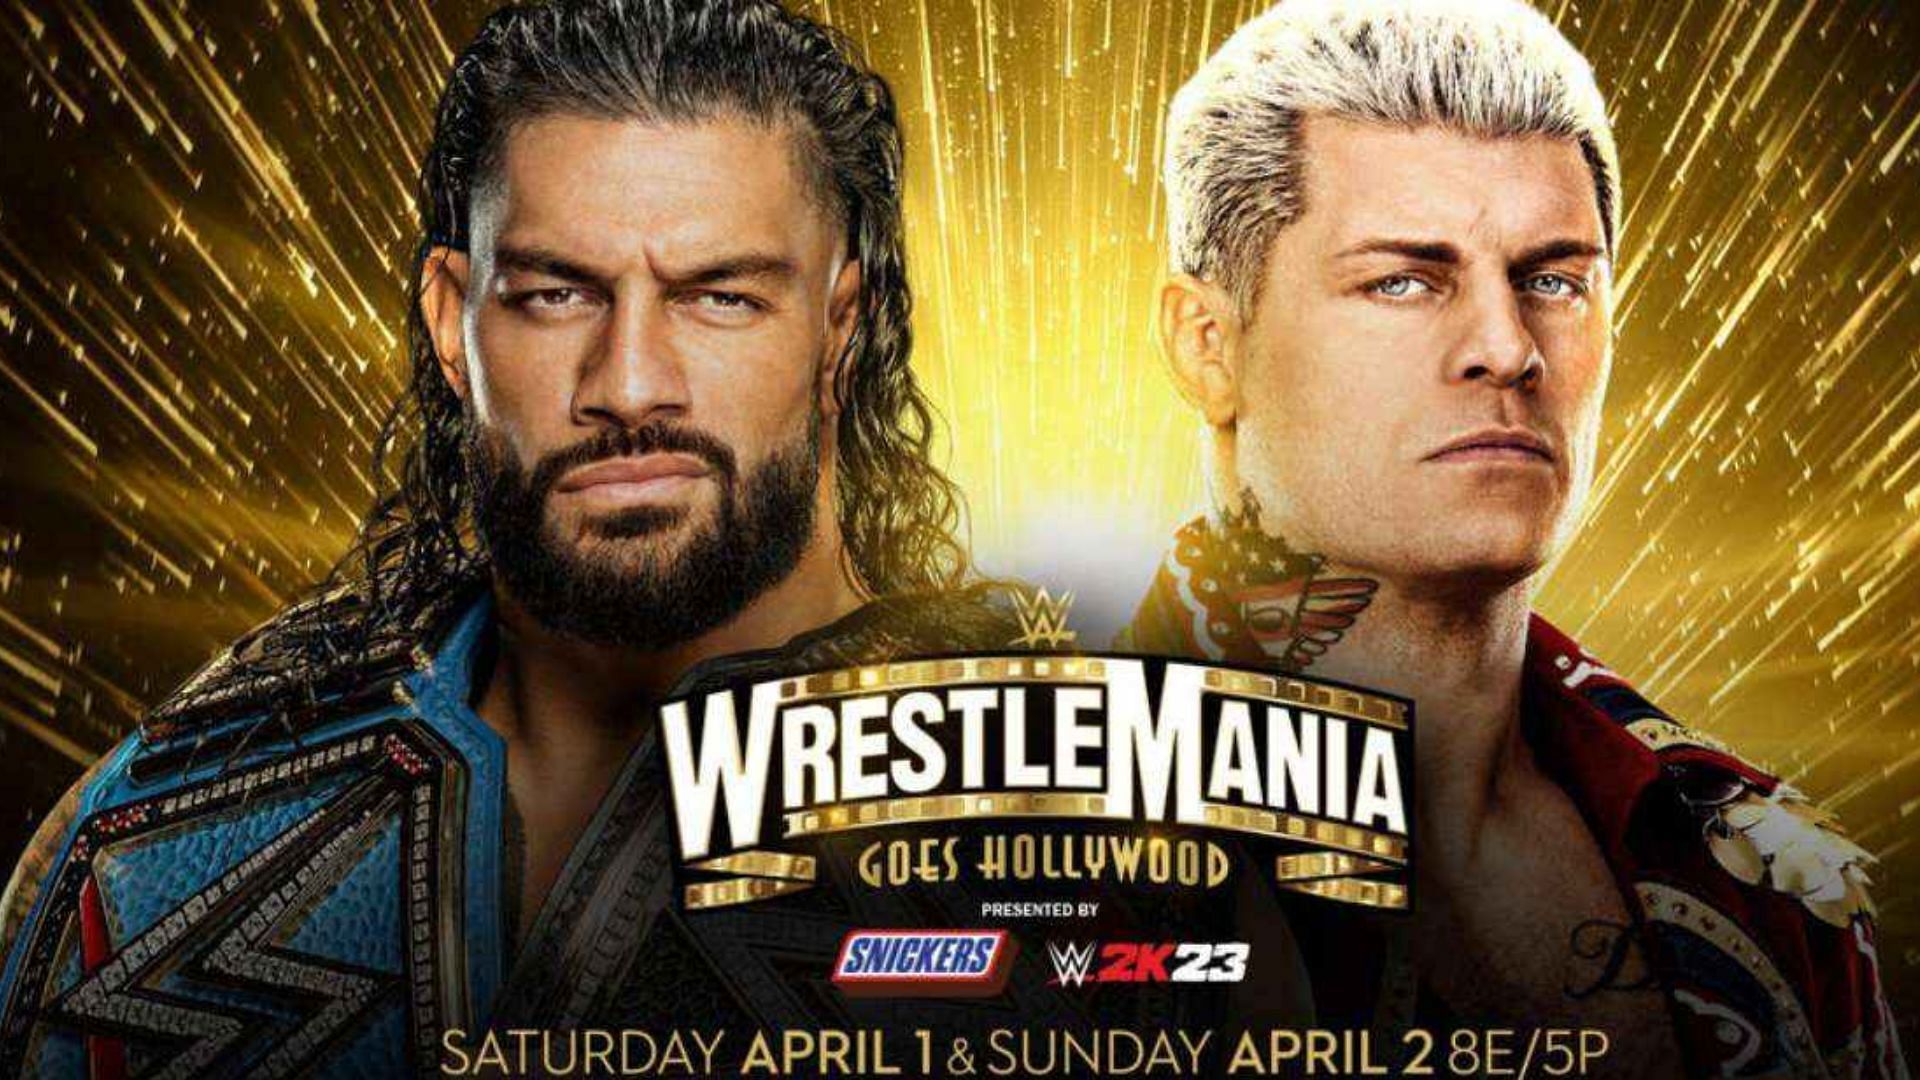 Roman Reigns vs. Cody Rhodes is the undisputed main event of WWE WrestleMania 39.